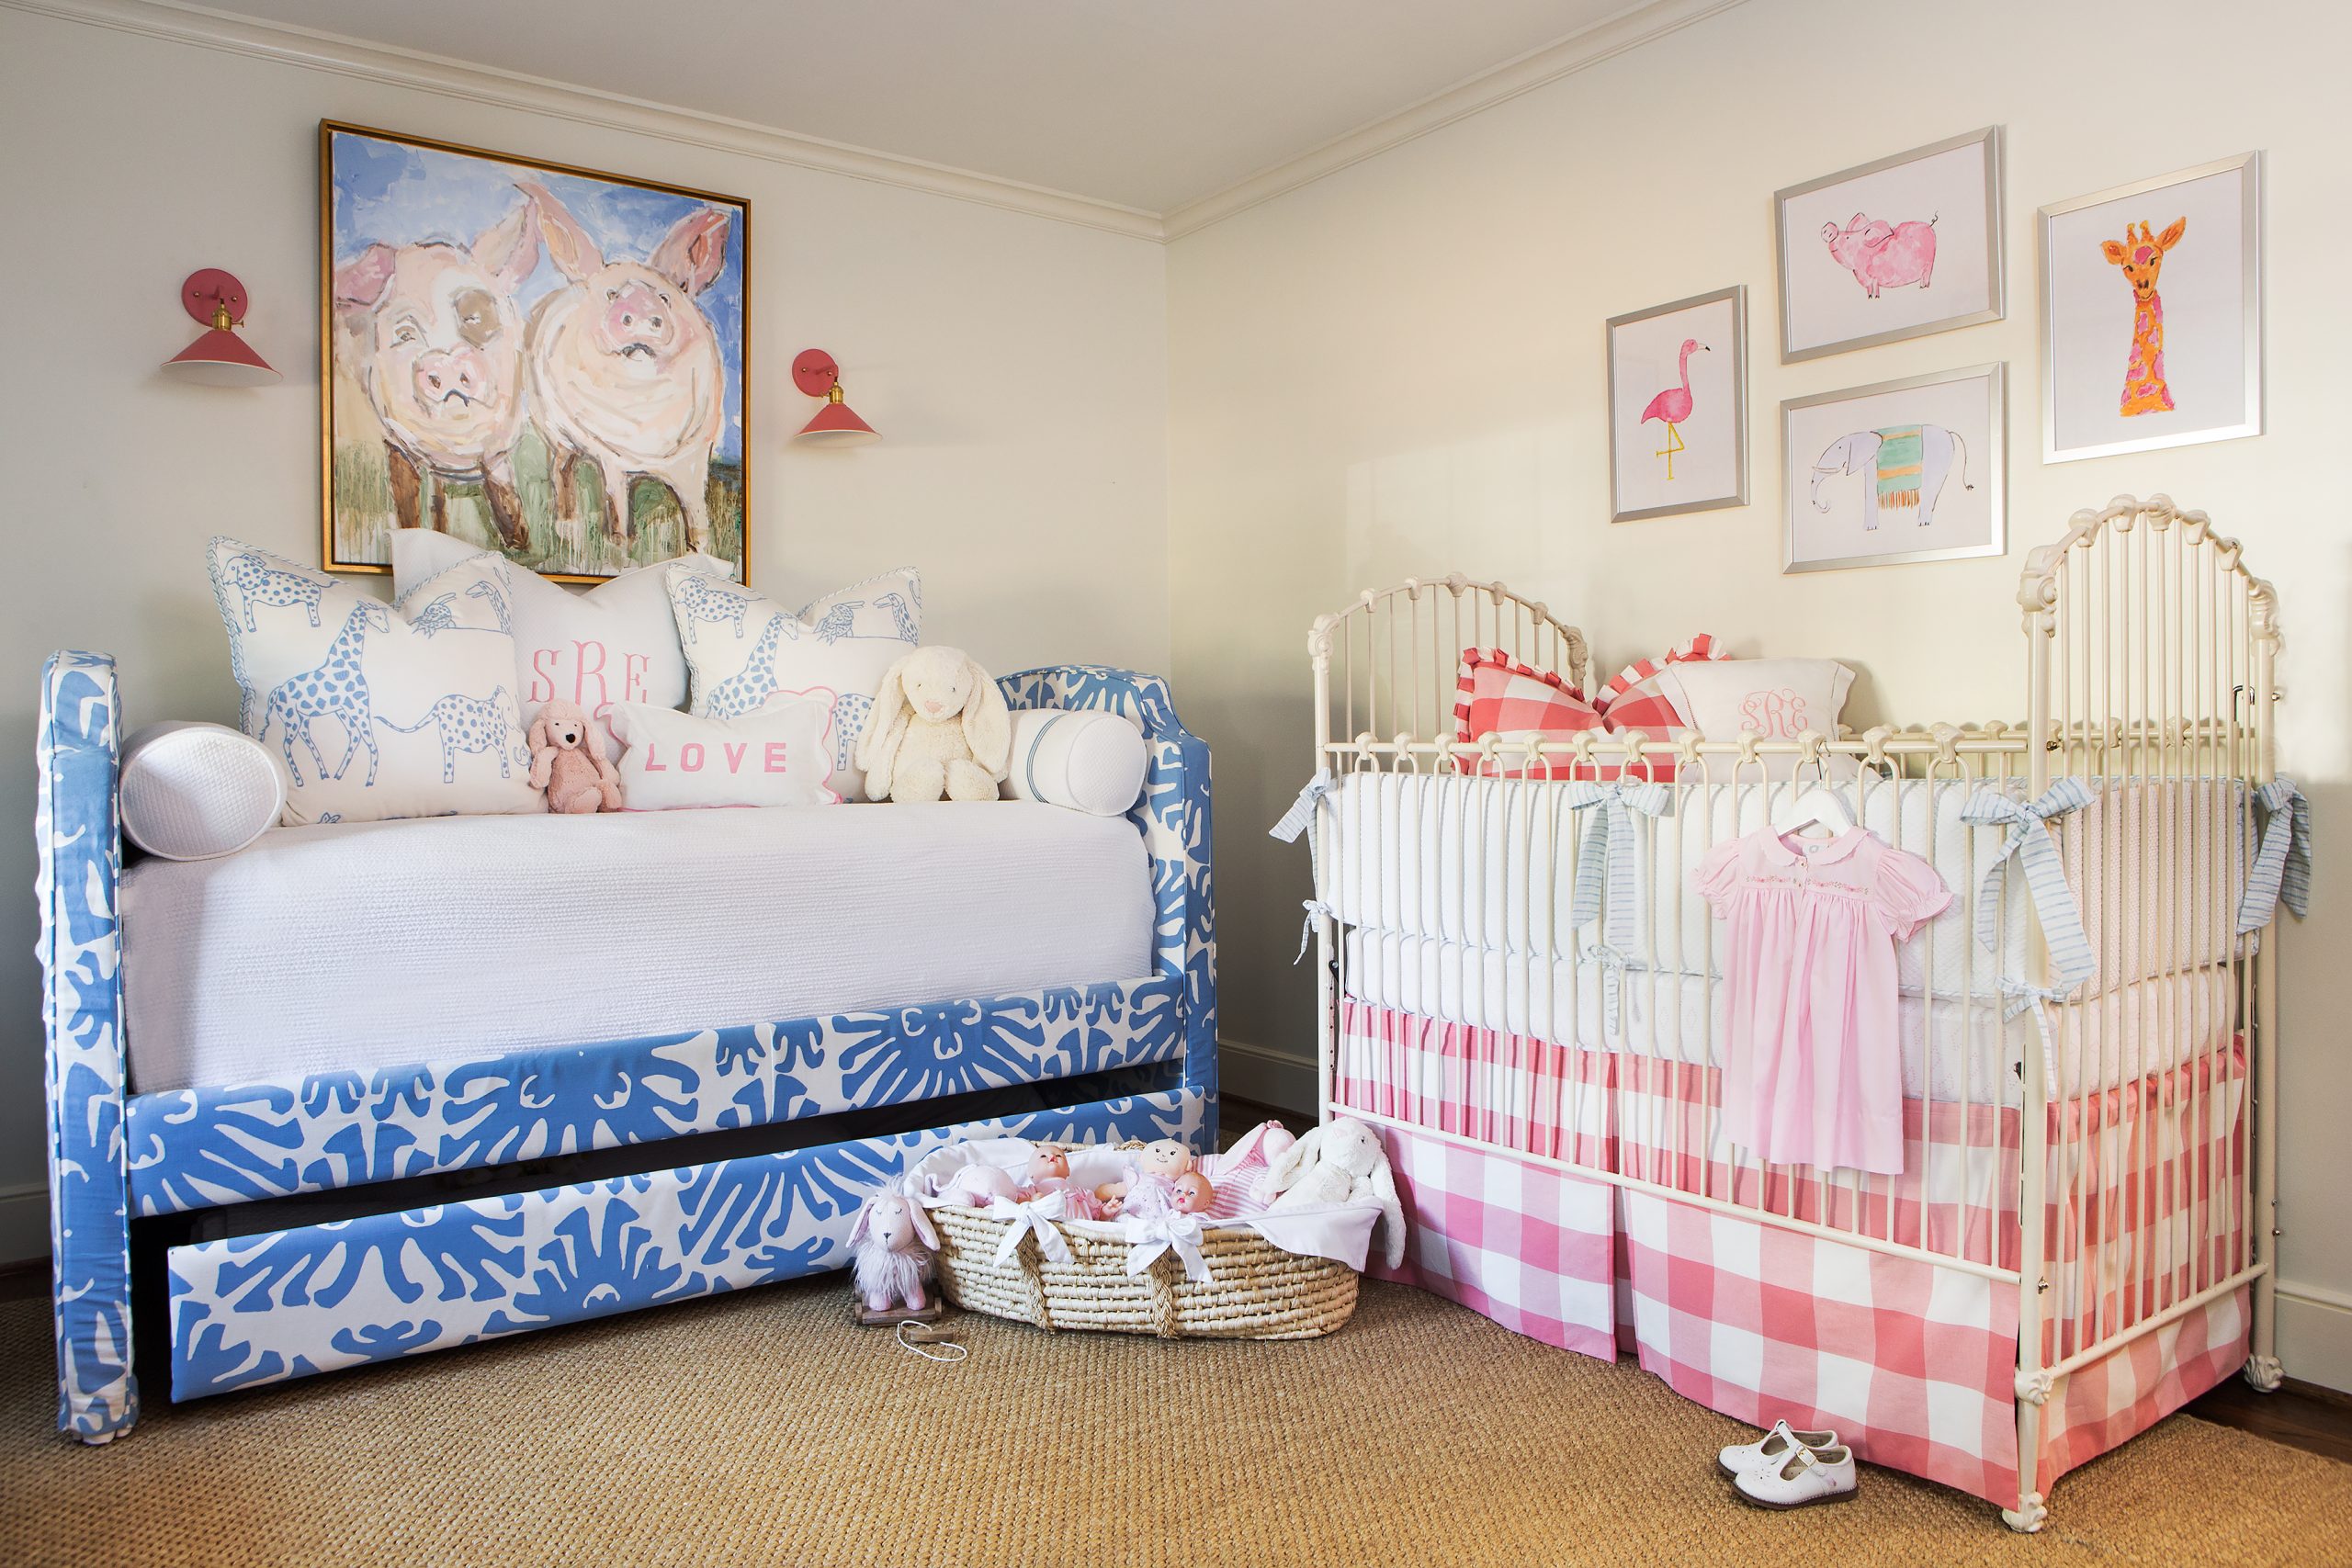 Sarah and Mike Rama had baby Salley just 15 months after their son. Careful planning from the onset made the transition easy and inexpensive. Sarah transformed the nursery into a room for her daughter by changing the custom pillows and adding a few dabs of pink highlighted by a plaid dust skirt on a new crib. 